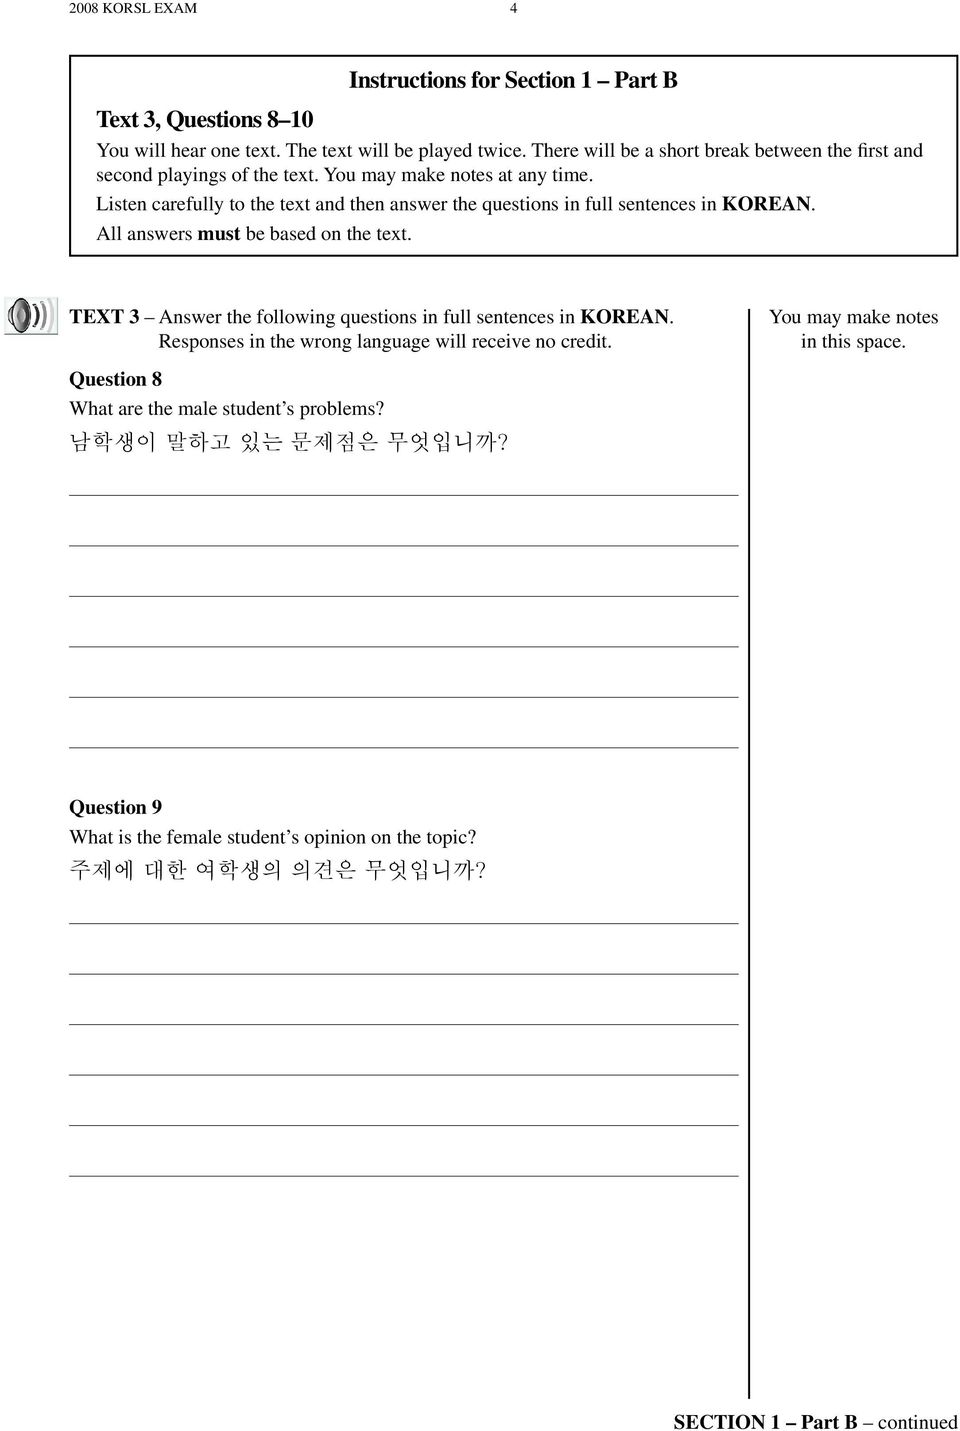 Listen carefully to the text and then answer the questions in full sentences in KOREAN. All answers must be based on the text.